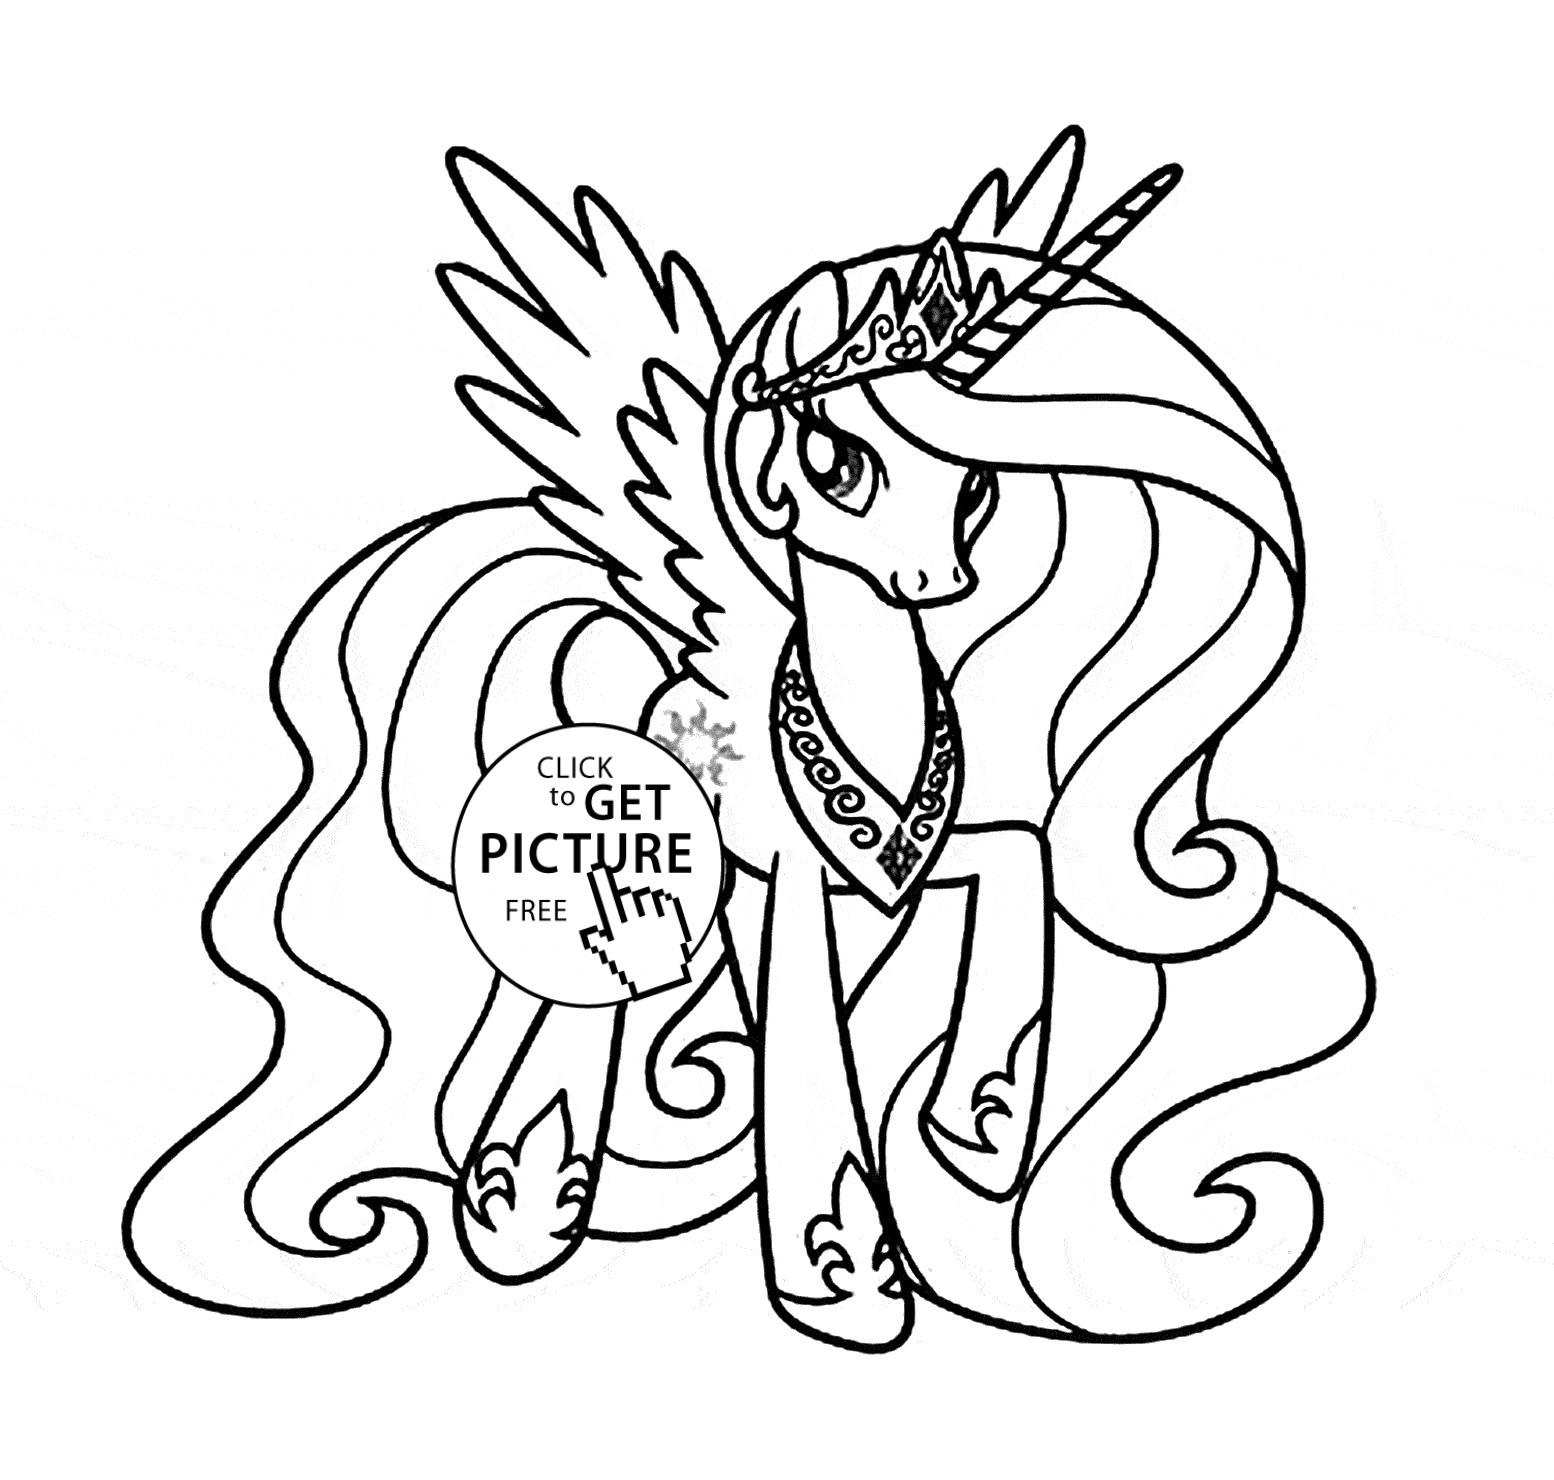 Coloring Sheets For Girls Mlp
 Princess Celestia My little pony coloring page for kids